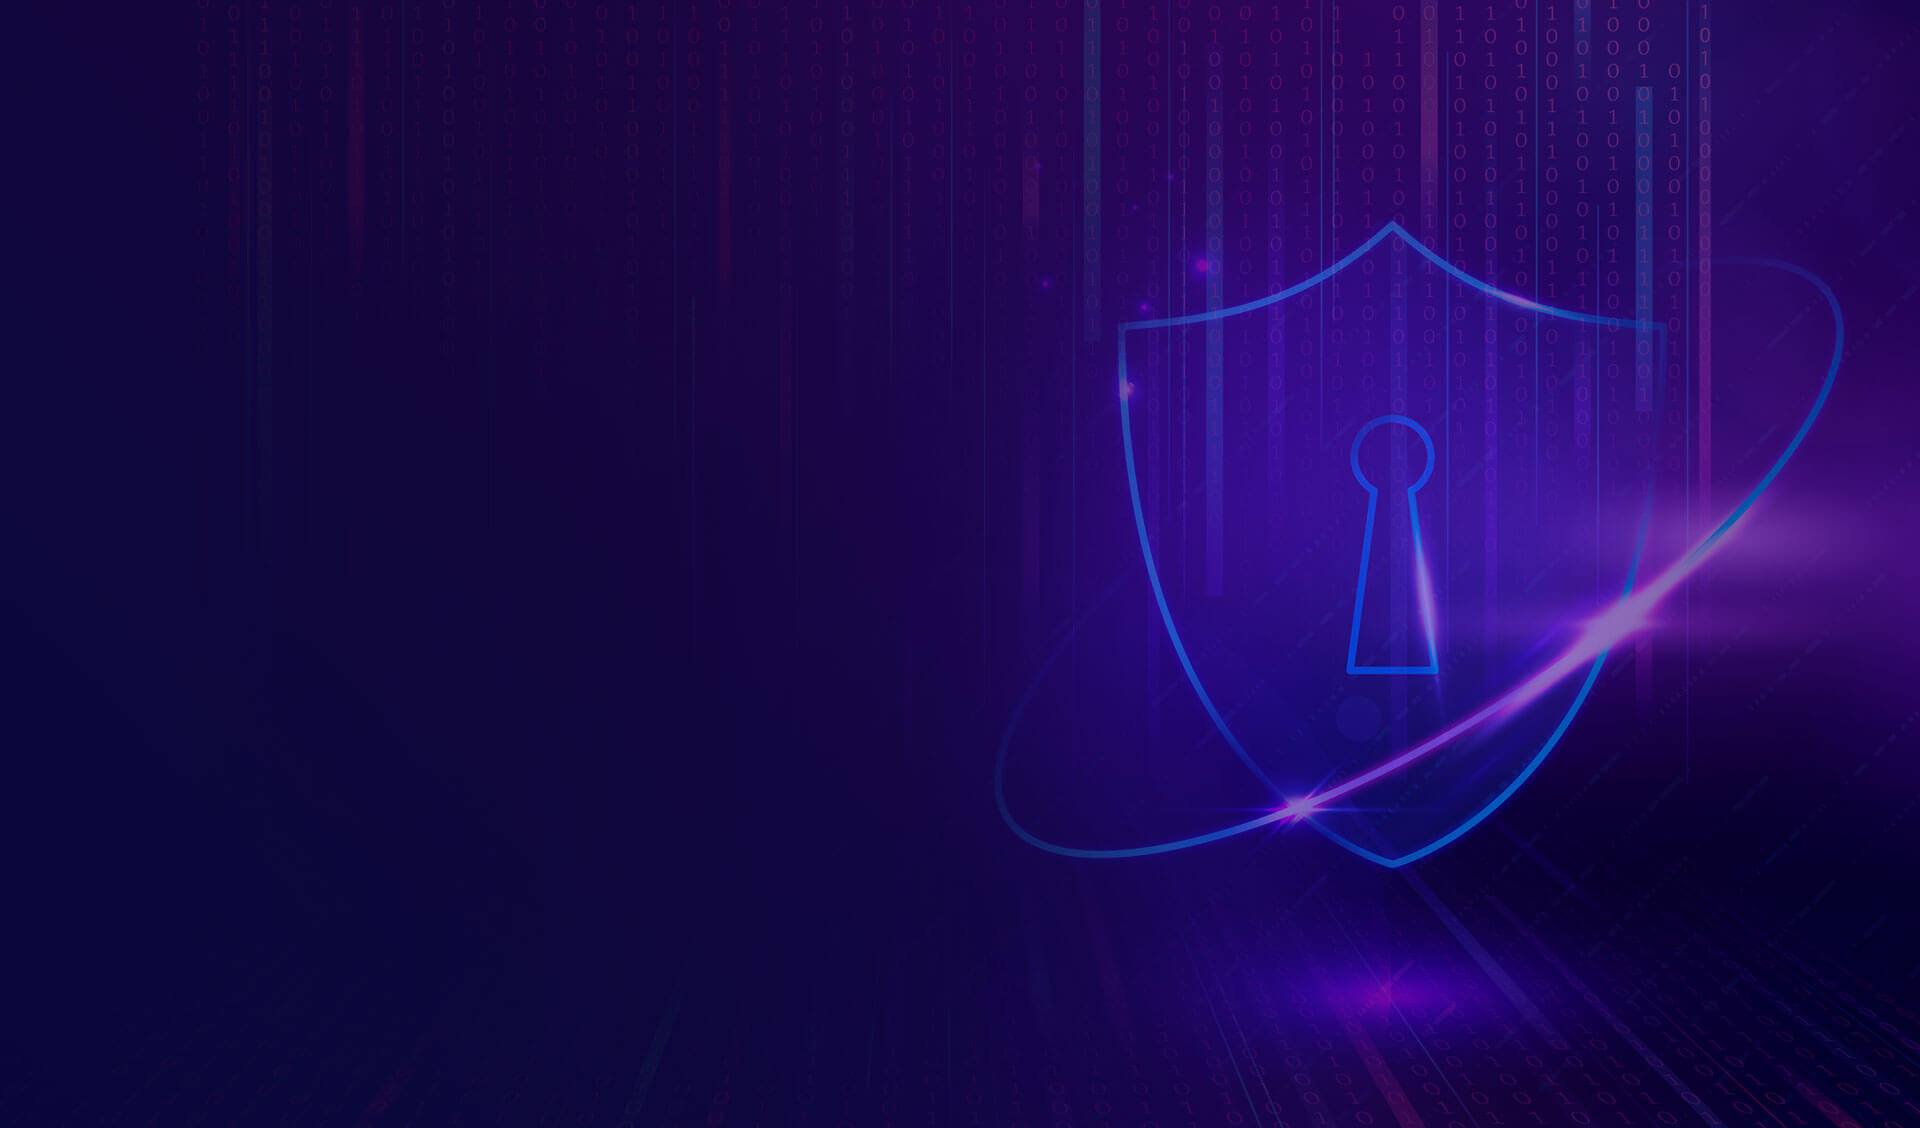 Cybersecurity services from Futurism Technologies